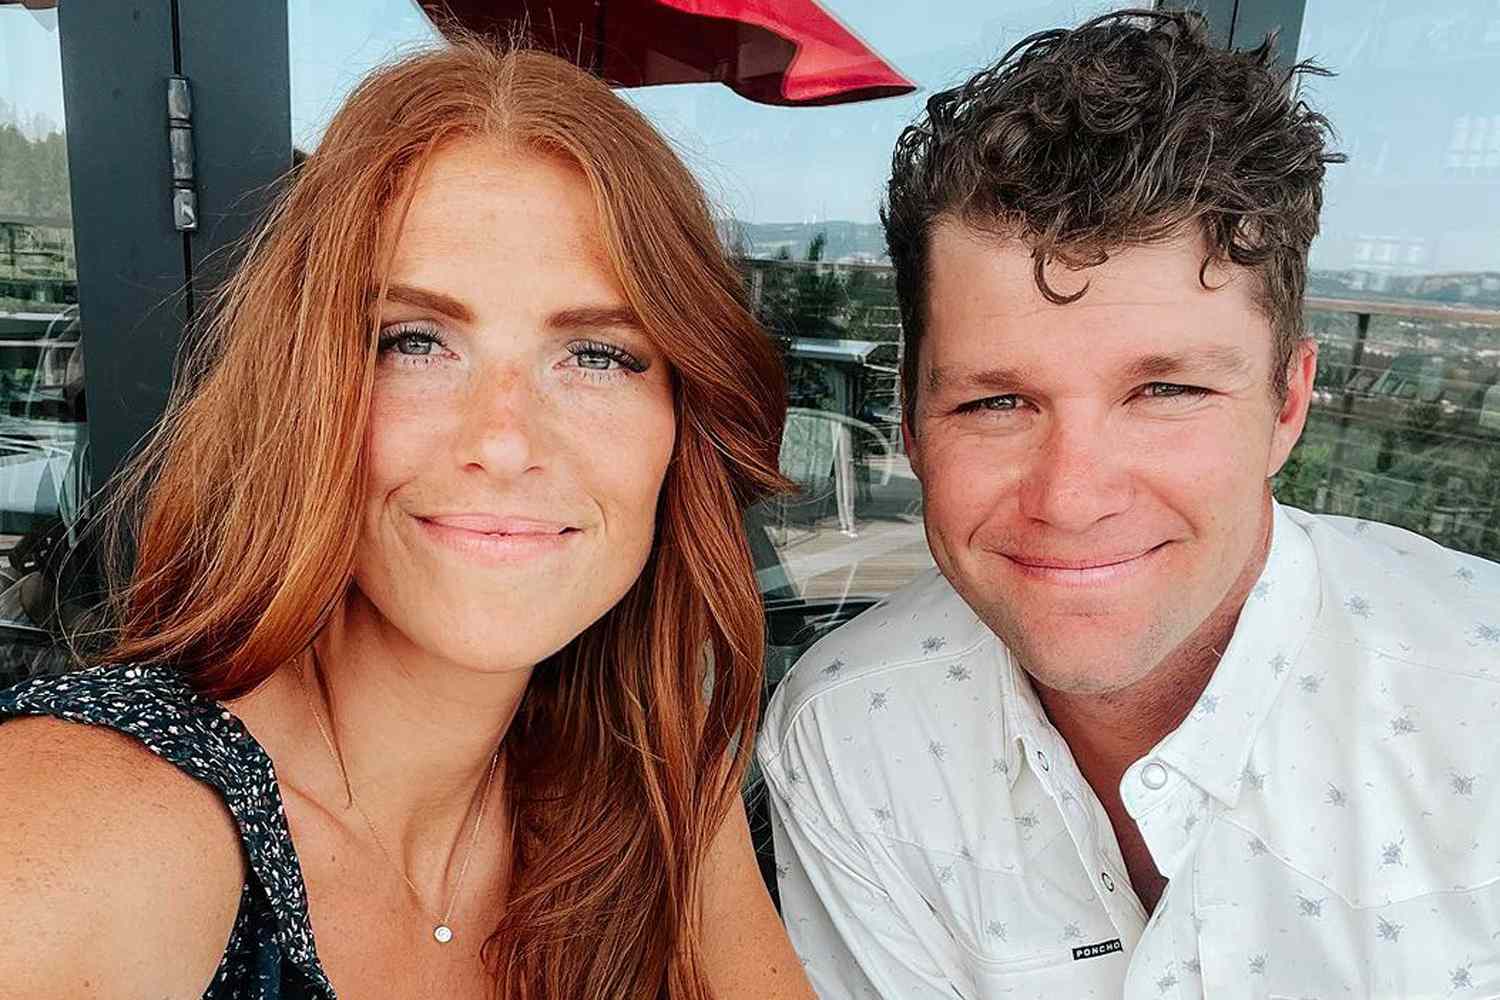 “Little People, Big World”'s Jeremy and Audrey Roloff Welcome Baby No. 4: 'Soaking in All the Cuddles'